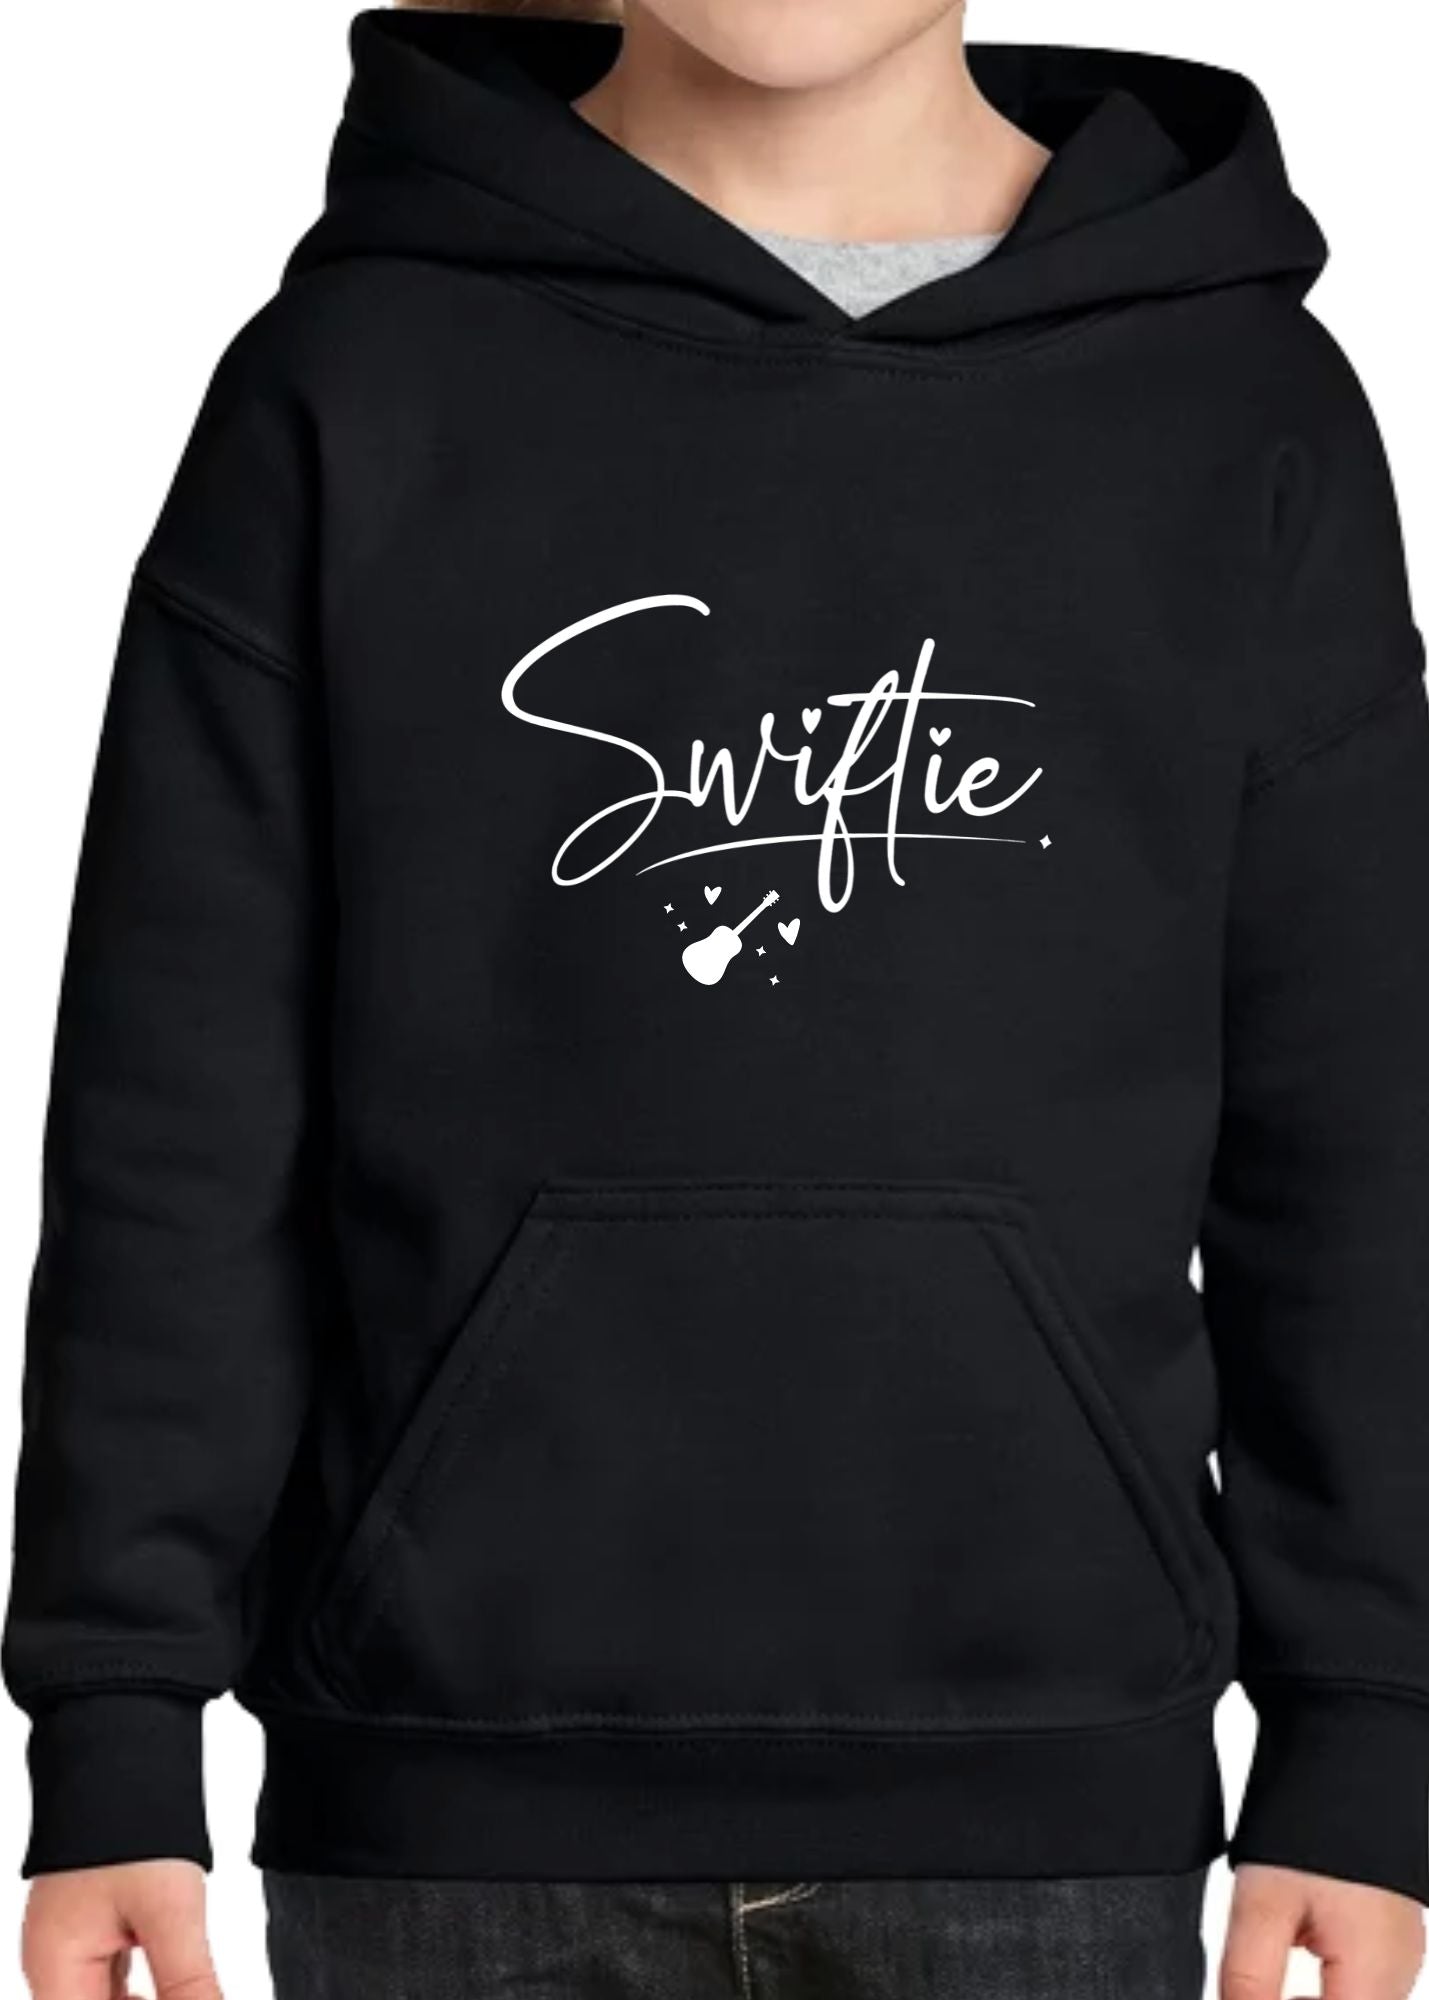 Swiftie Taylor Swift YOUTH FIT hoodie 